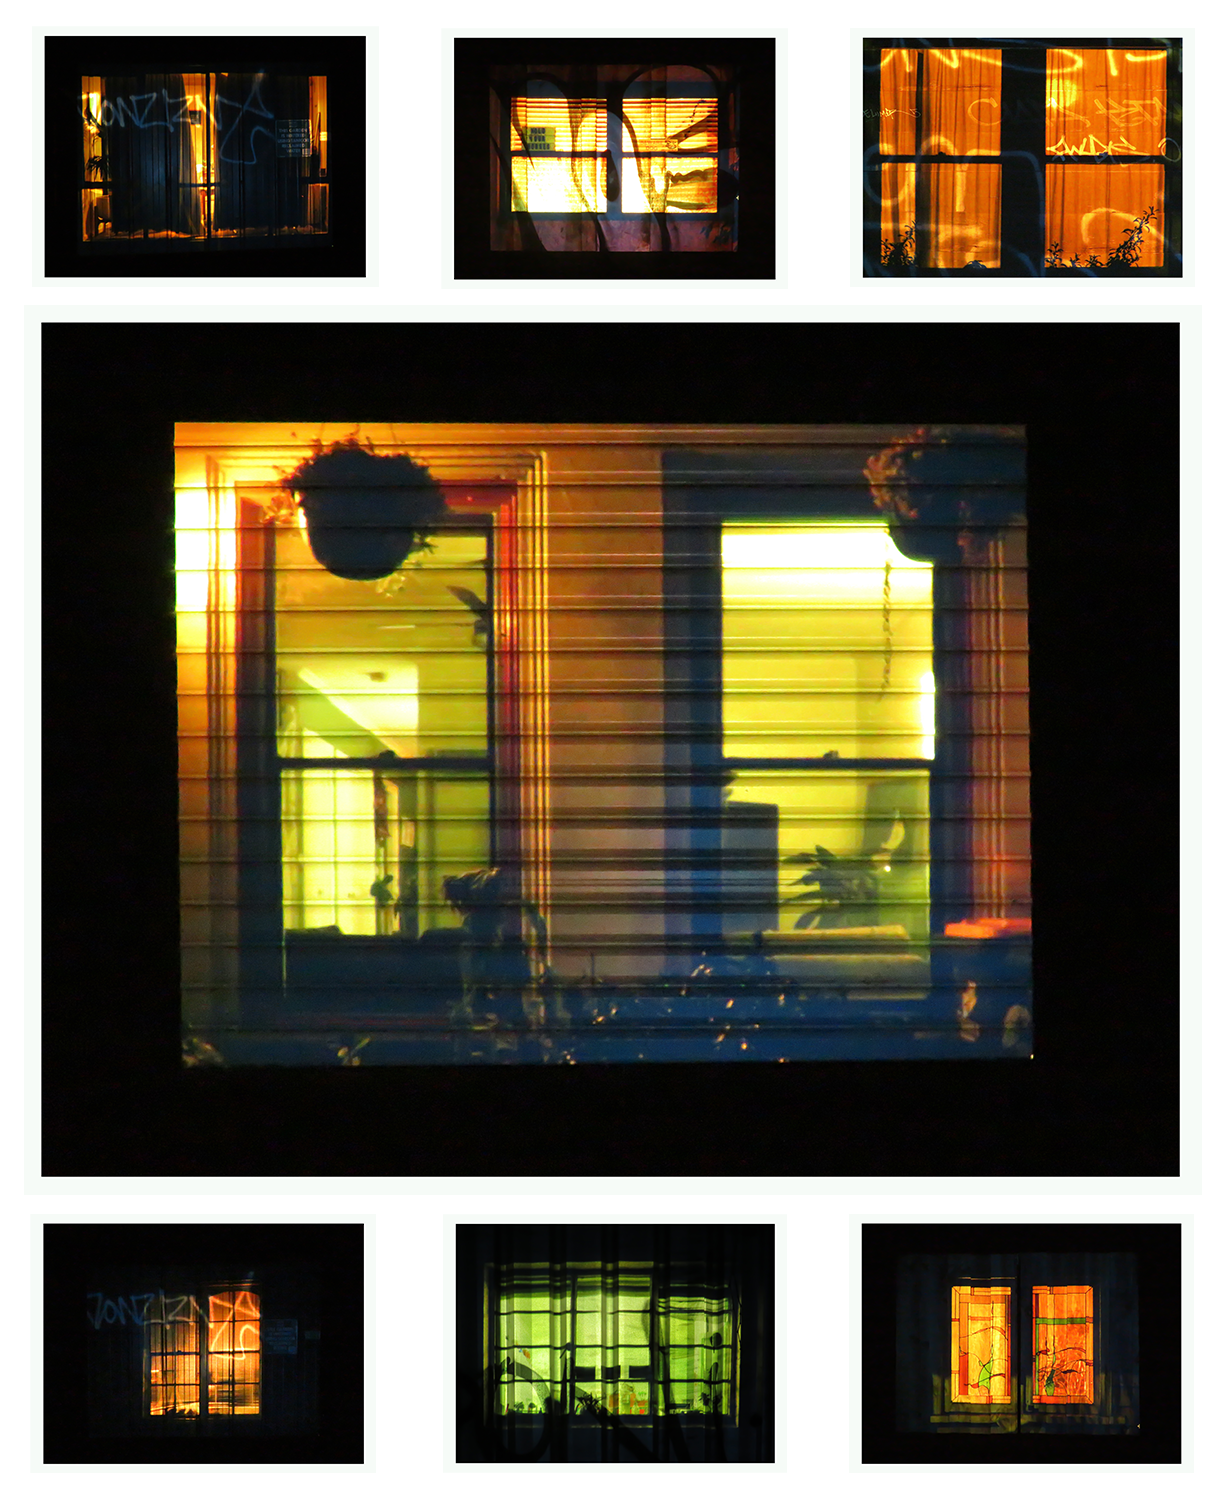 Photographs of windows projected onto urban surfaces, Night time.